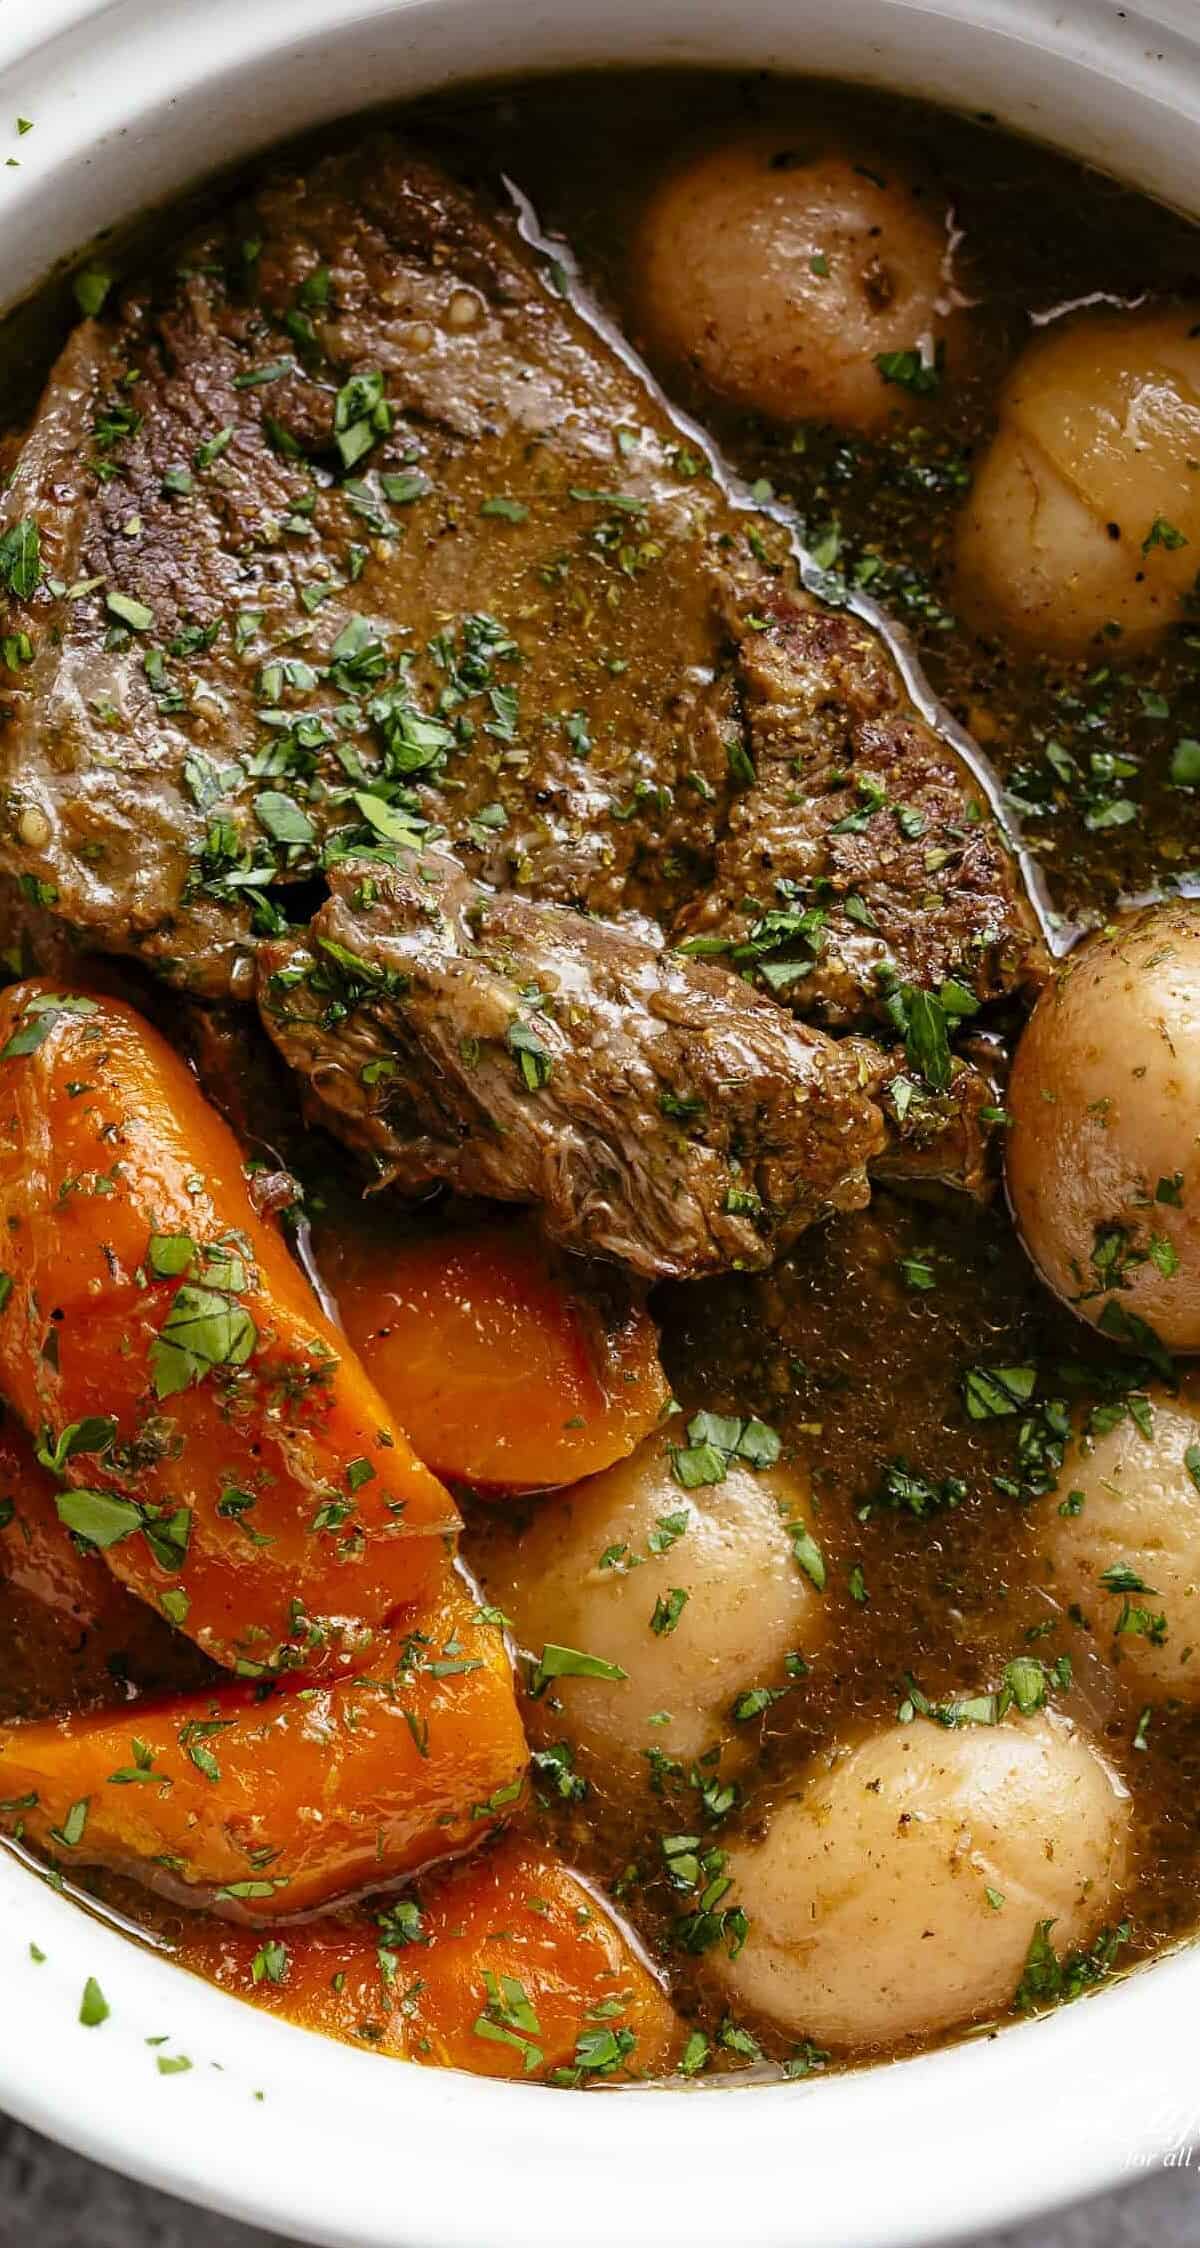  Make your neighbors envious with the delicious smell of slow-cooked pot roast wafting from your kitchen.